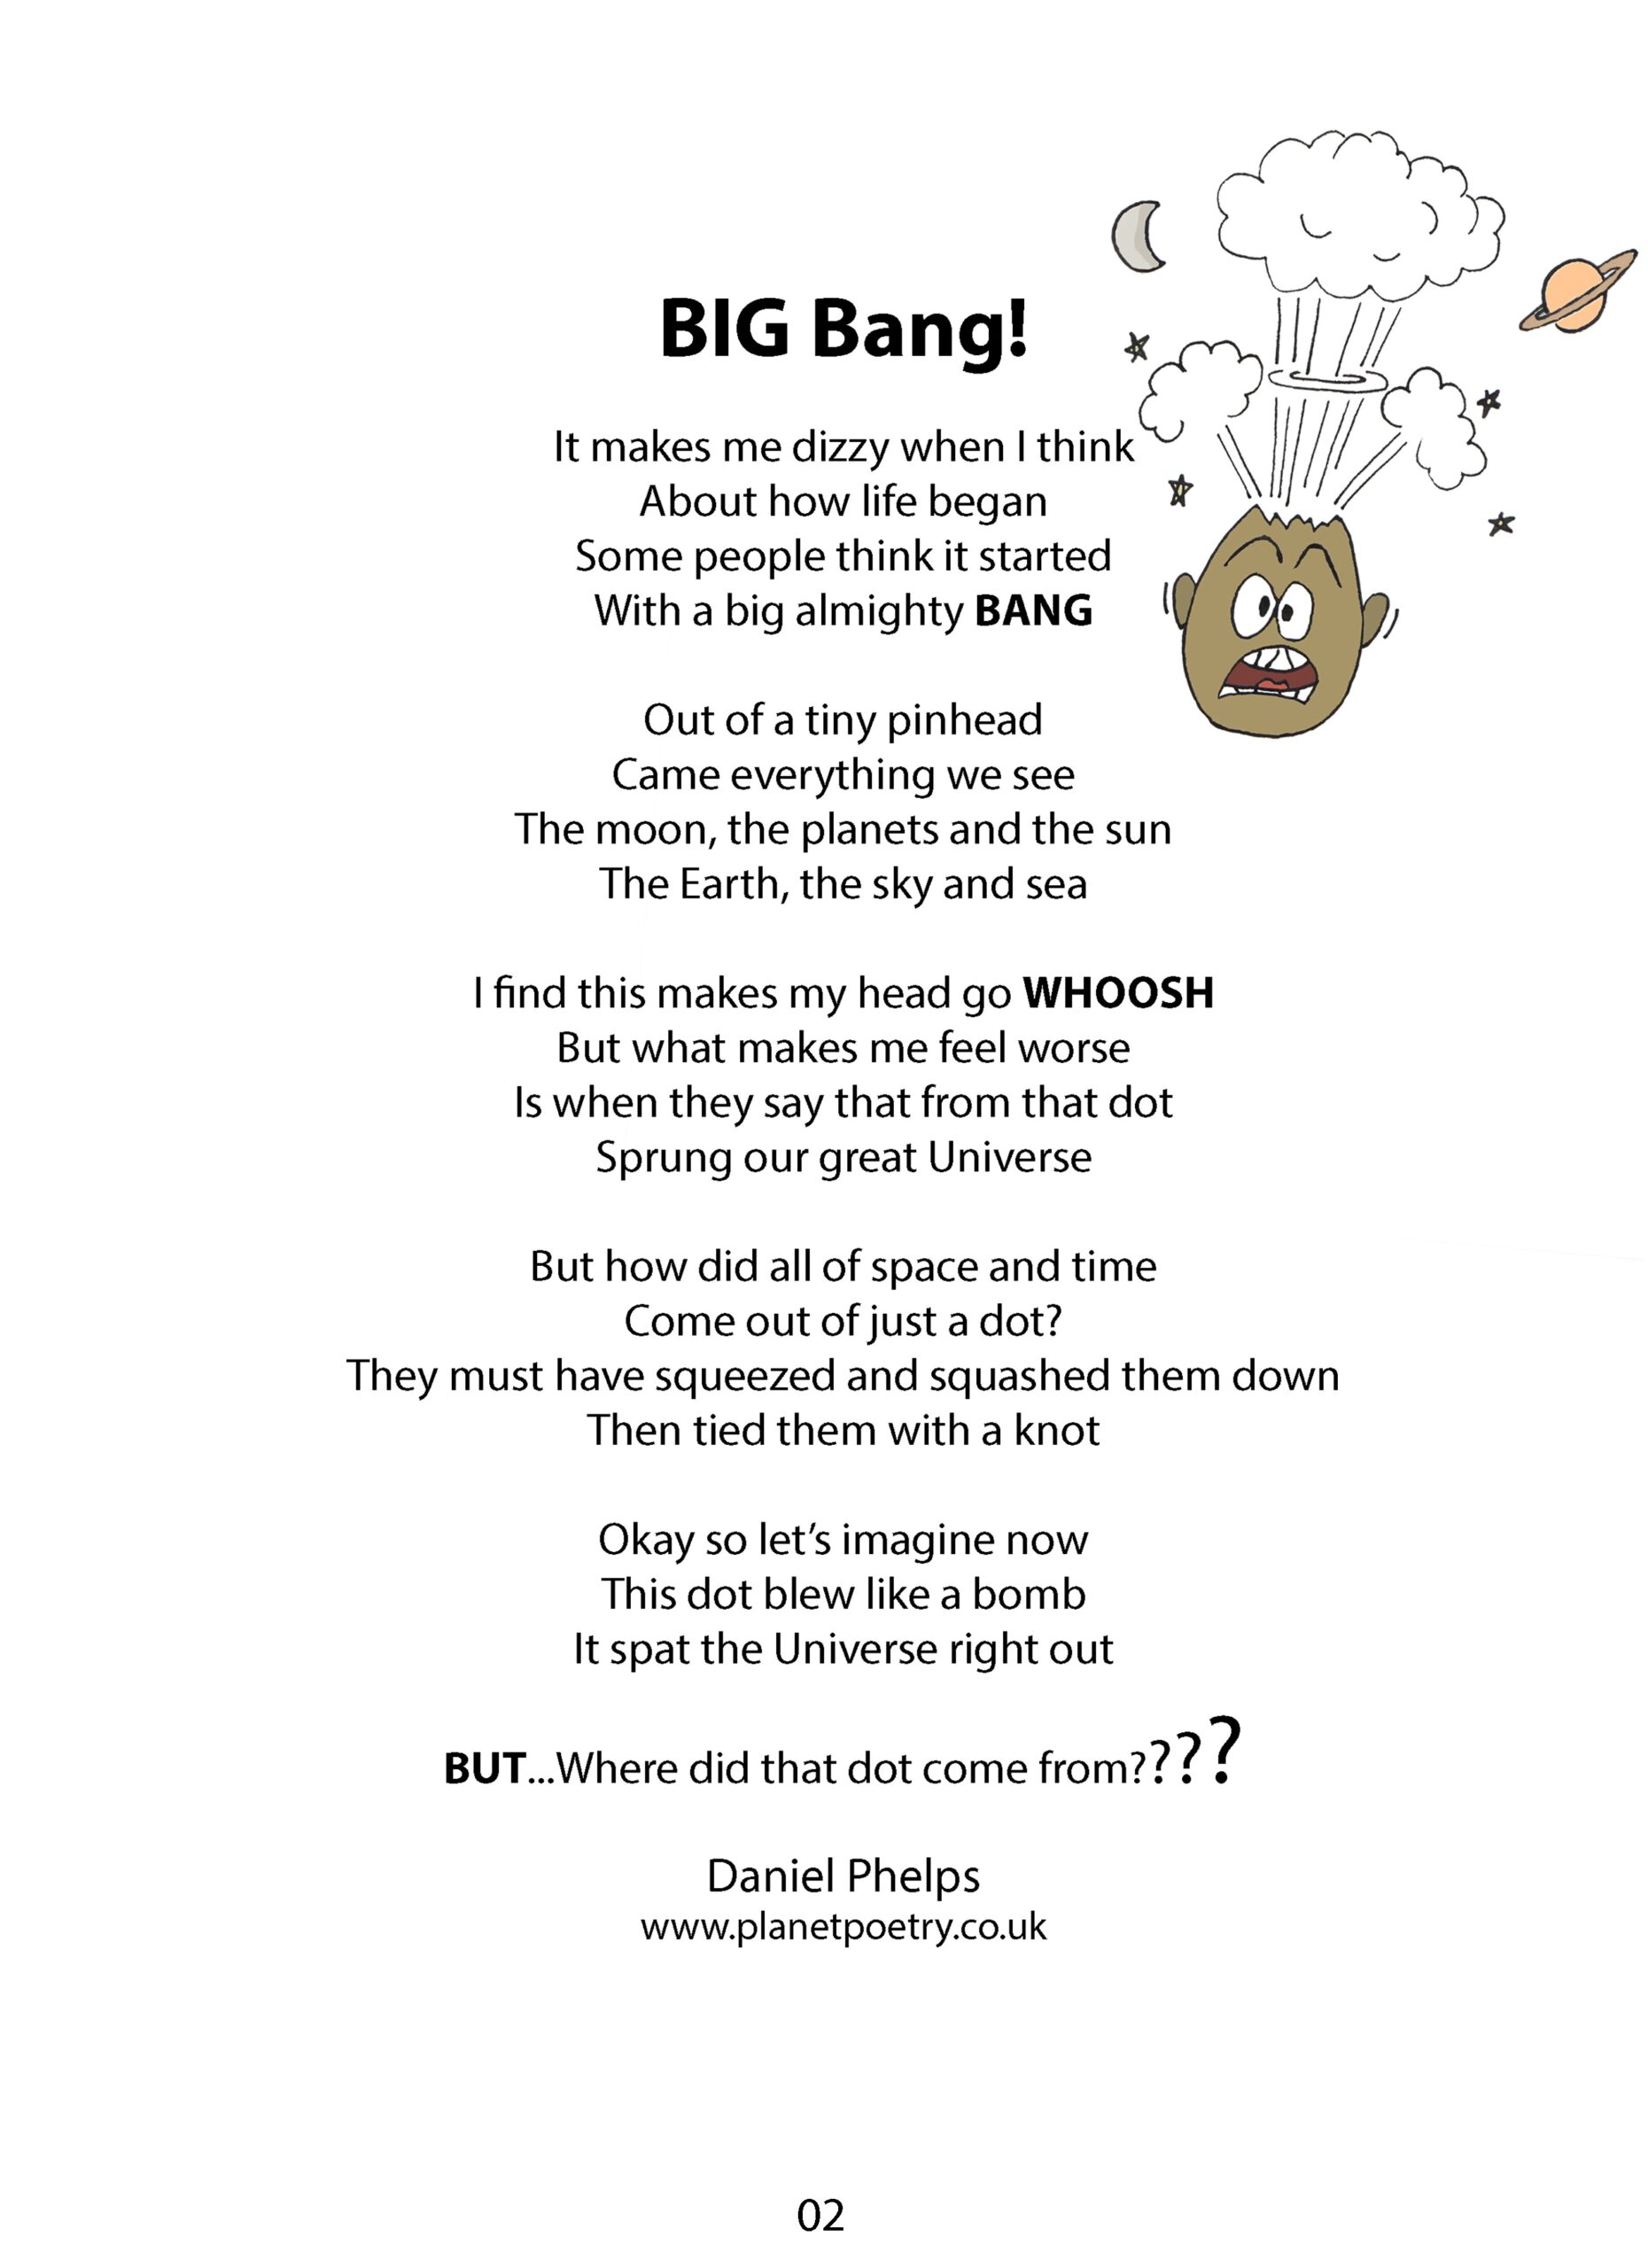 BIG BANG- For National Poetry Day